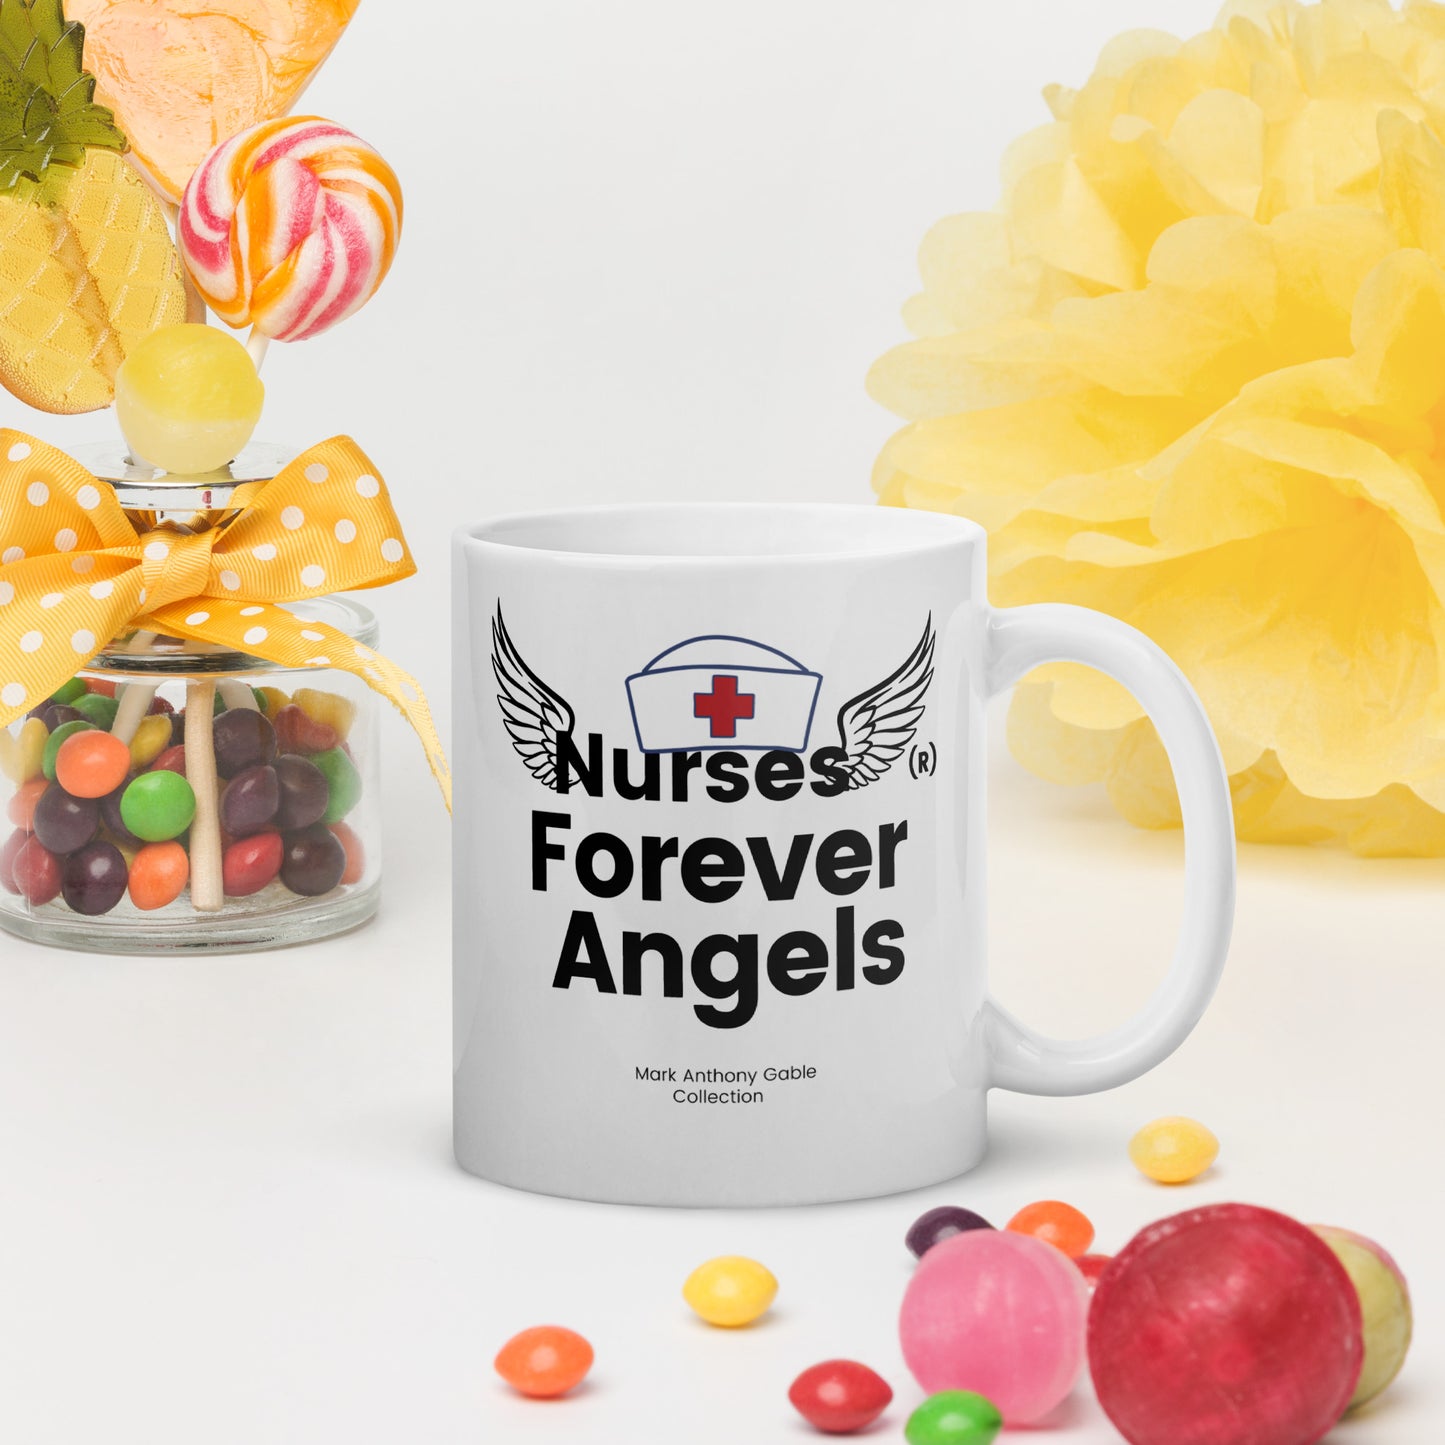 White glossy mug NURSES (R) FOREVER ANGELS by  "Mark Anthony Gable Collection-FOREVER ANGEL"